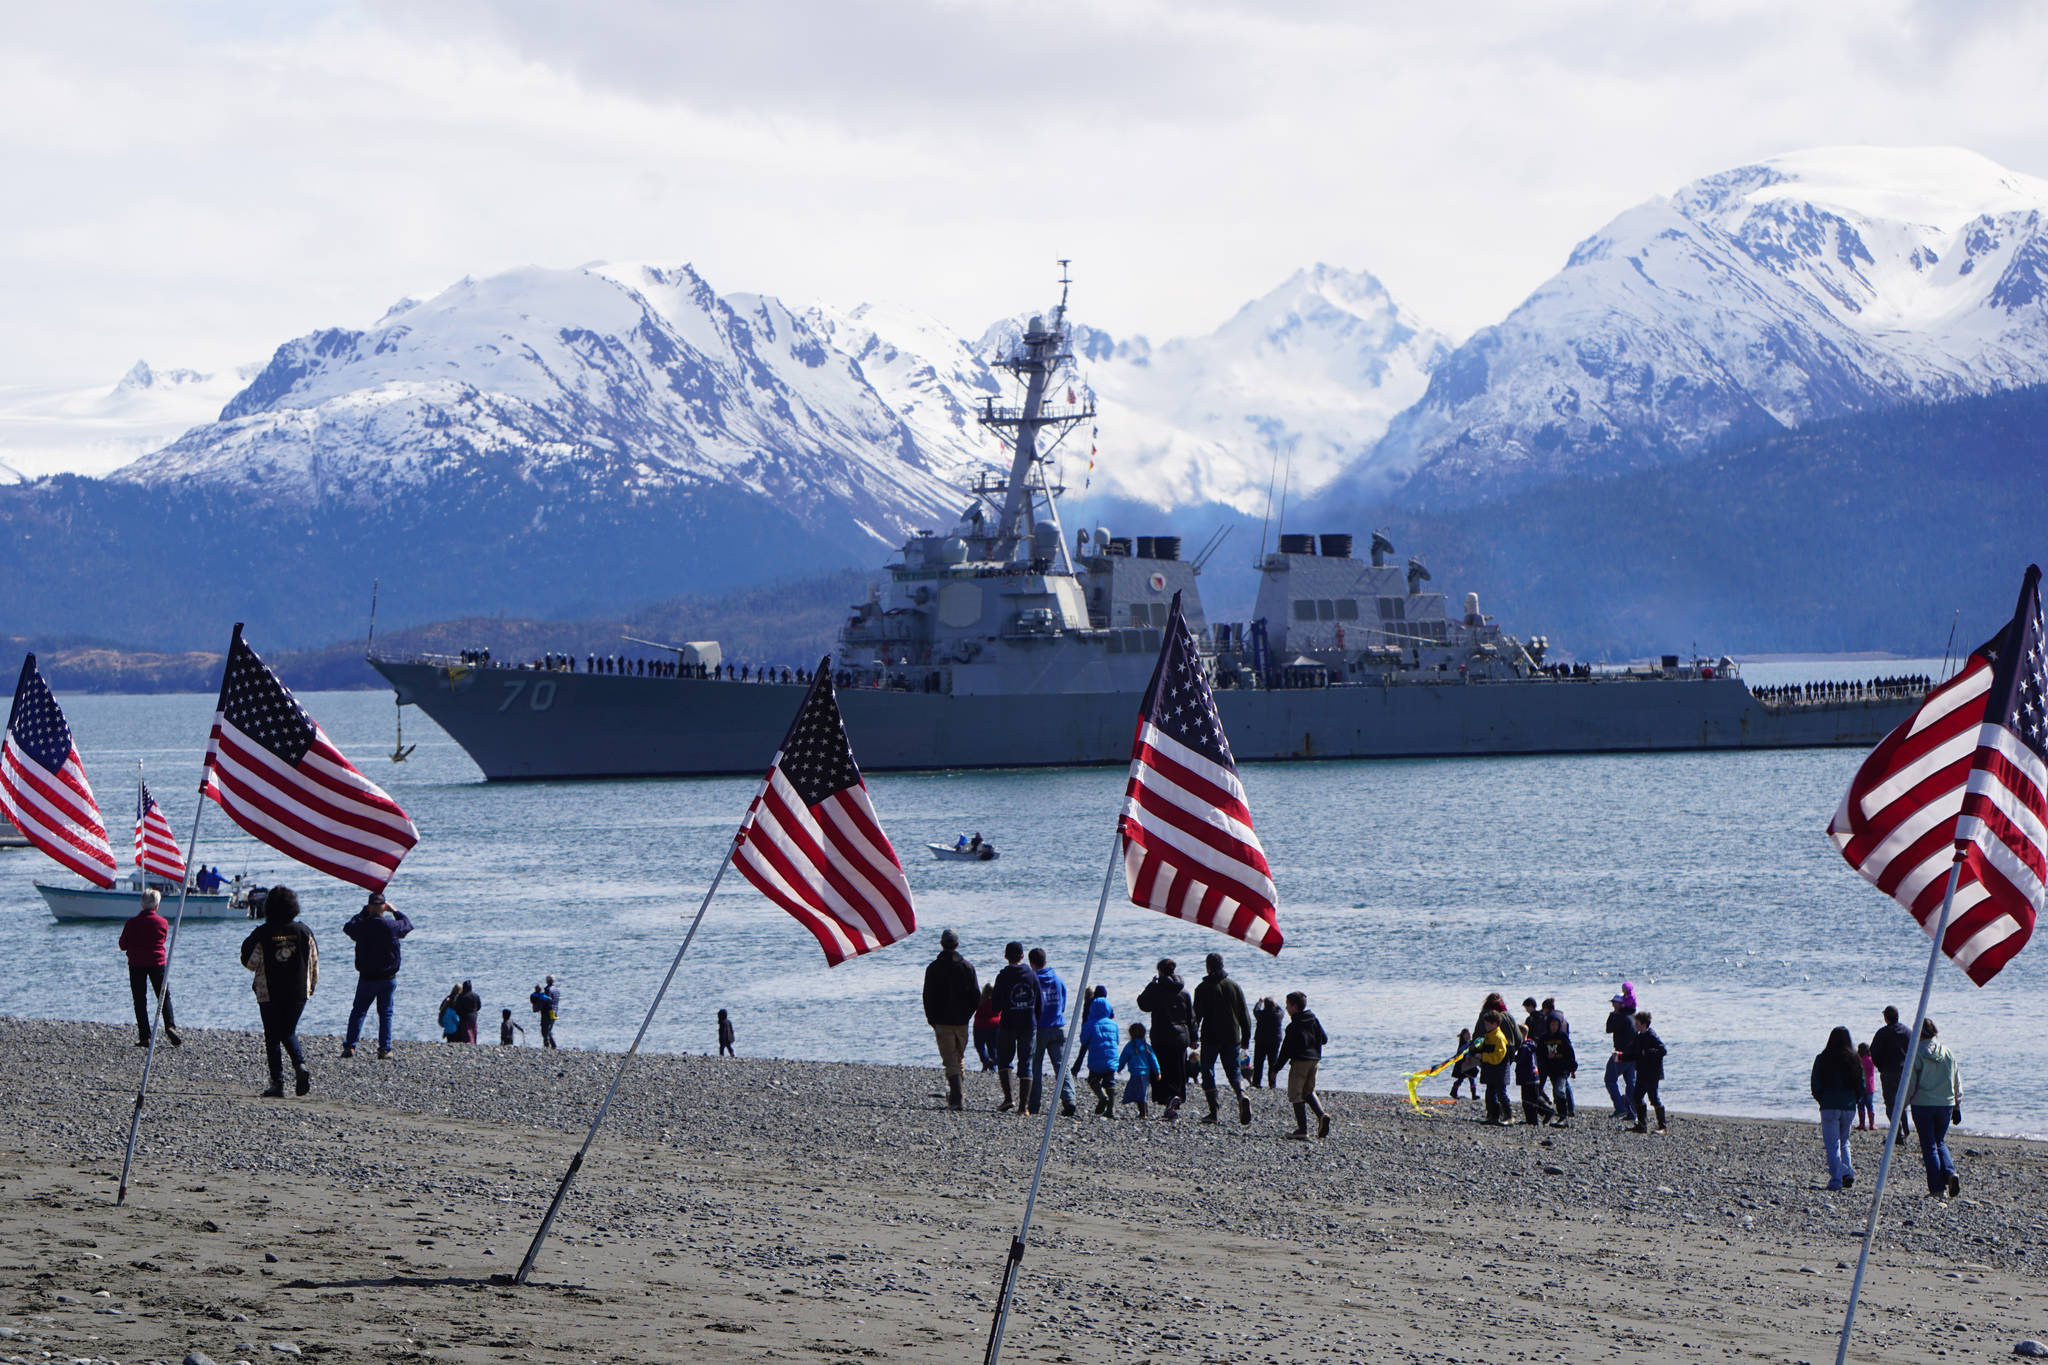 A crowd of about 200 people greeted USS Hopper as she rounded Coal Point at the end of the Homer Spit about noon Saturday, April 29, 2017, as the Arleigh-Burke class destroyer arrived in Alaska. Local veterans groups and the Homer Downtown Rotary Club provided U.S. flags placed on the beach. A minus 4.6 low tide at 11:37 a.m. and the wrong dock face prevented Hopper from docking at the Deep Water Dock as planned, and she was to attempt docking later in the afternoon. (Photo by Michael Armstrong/Homer News)